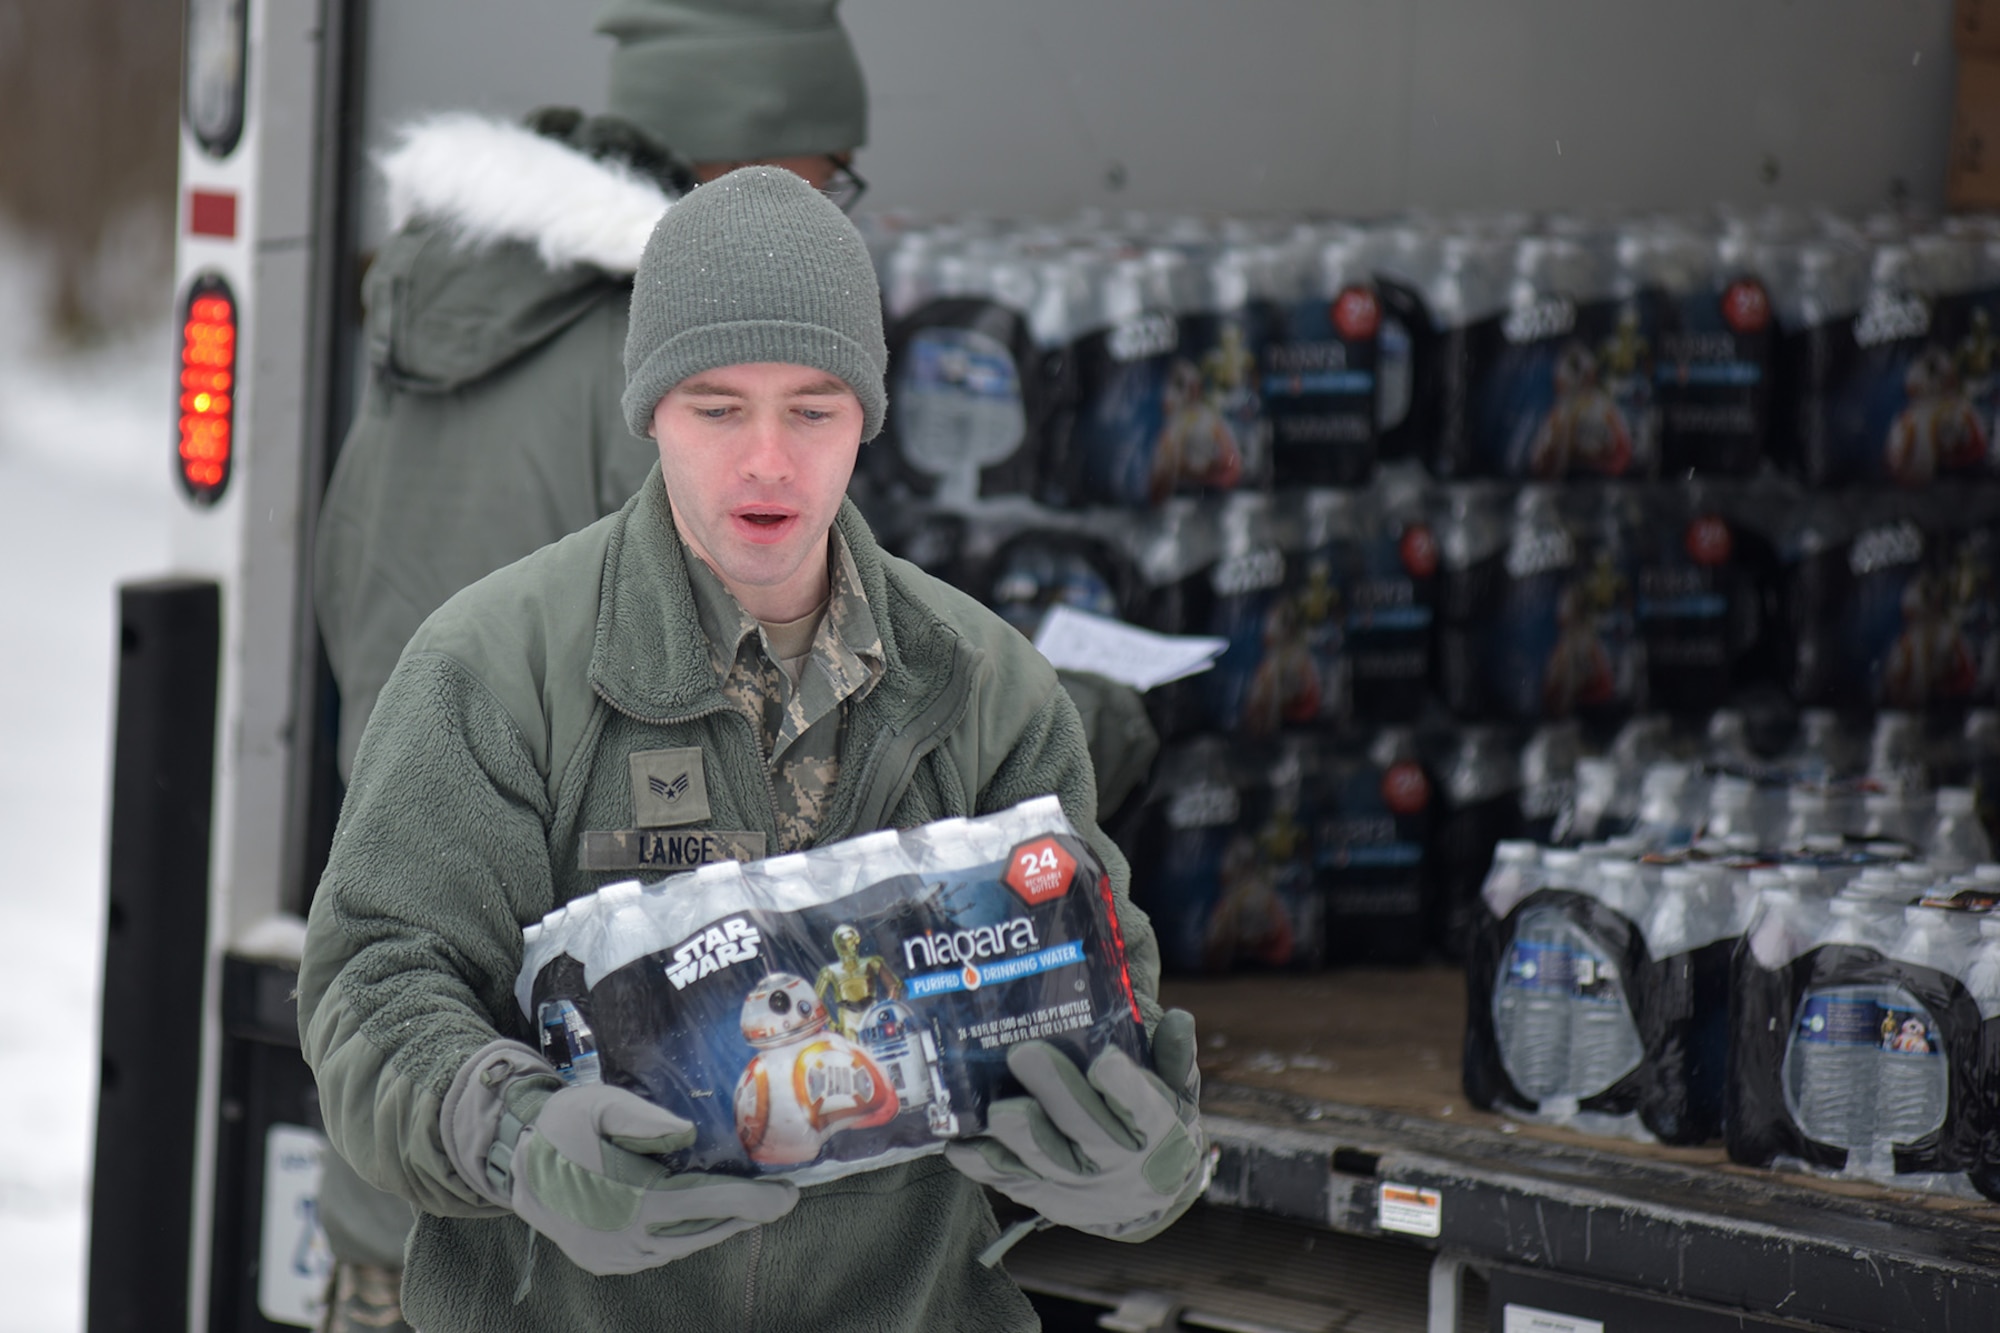 Michigan Air National Guard Senior Airman Scott Lange, a member of the 127th Wing assigned to Selfridge Air National Guard Base, carries a case of water during water delivery efforts in Flint, Mich., Jan. 21, 2016. Selfridge Air National Guard Base has served as a hub for water distribution efforts in Flint. (U.S. Air National Guard photo)